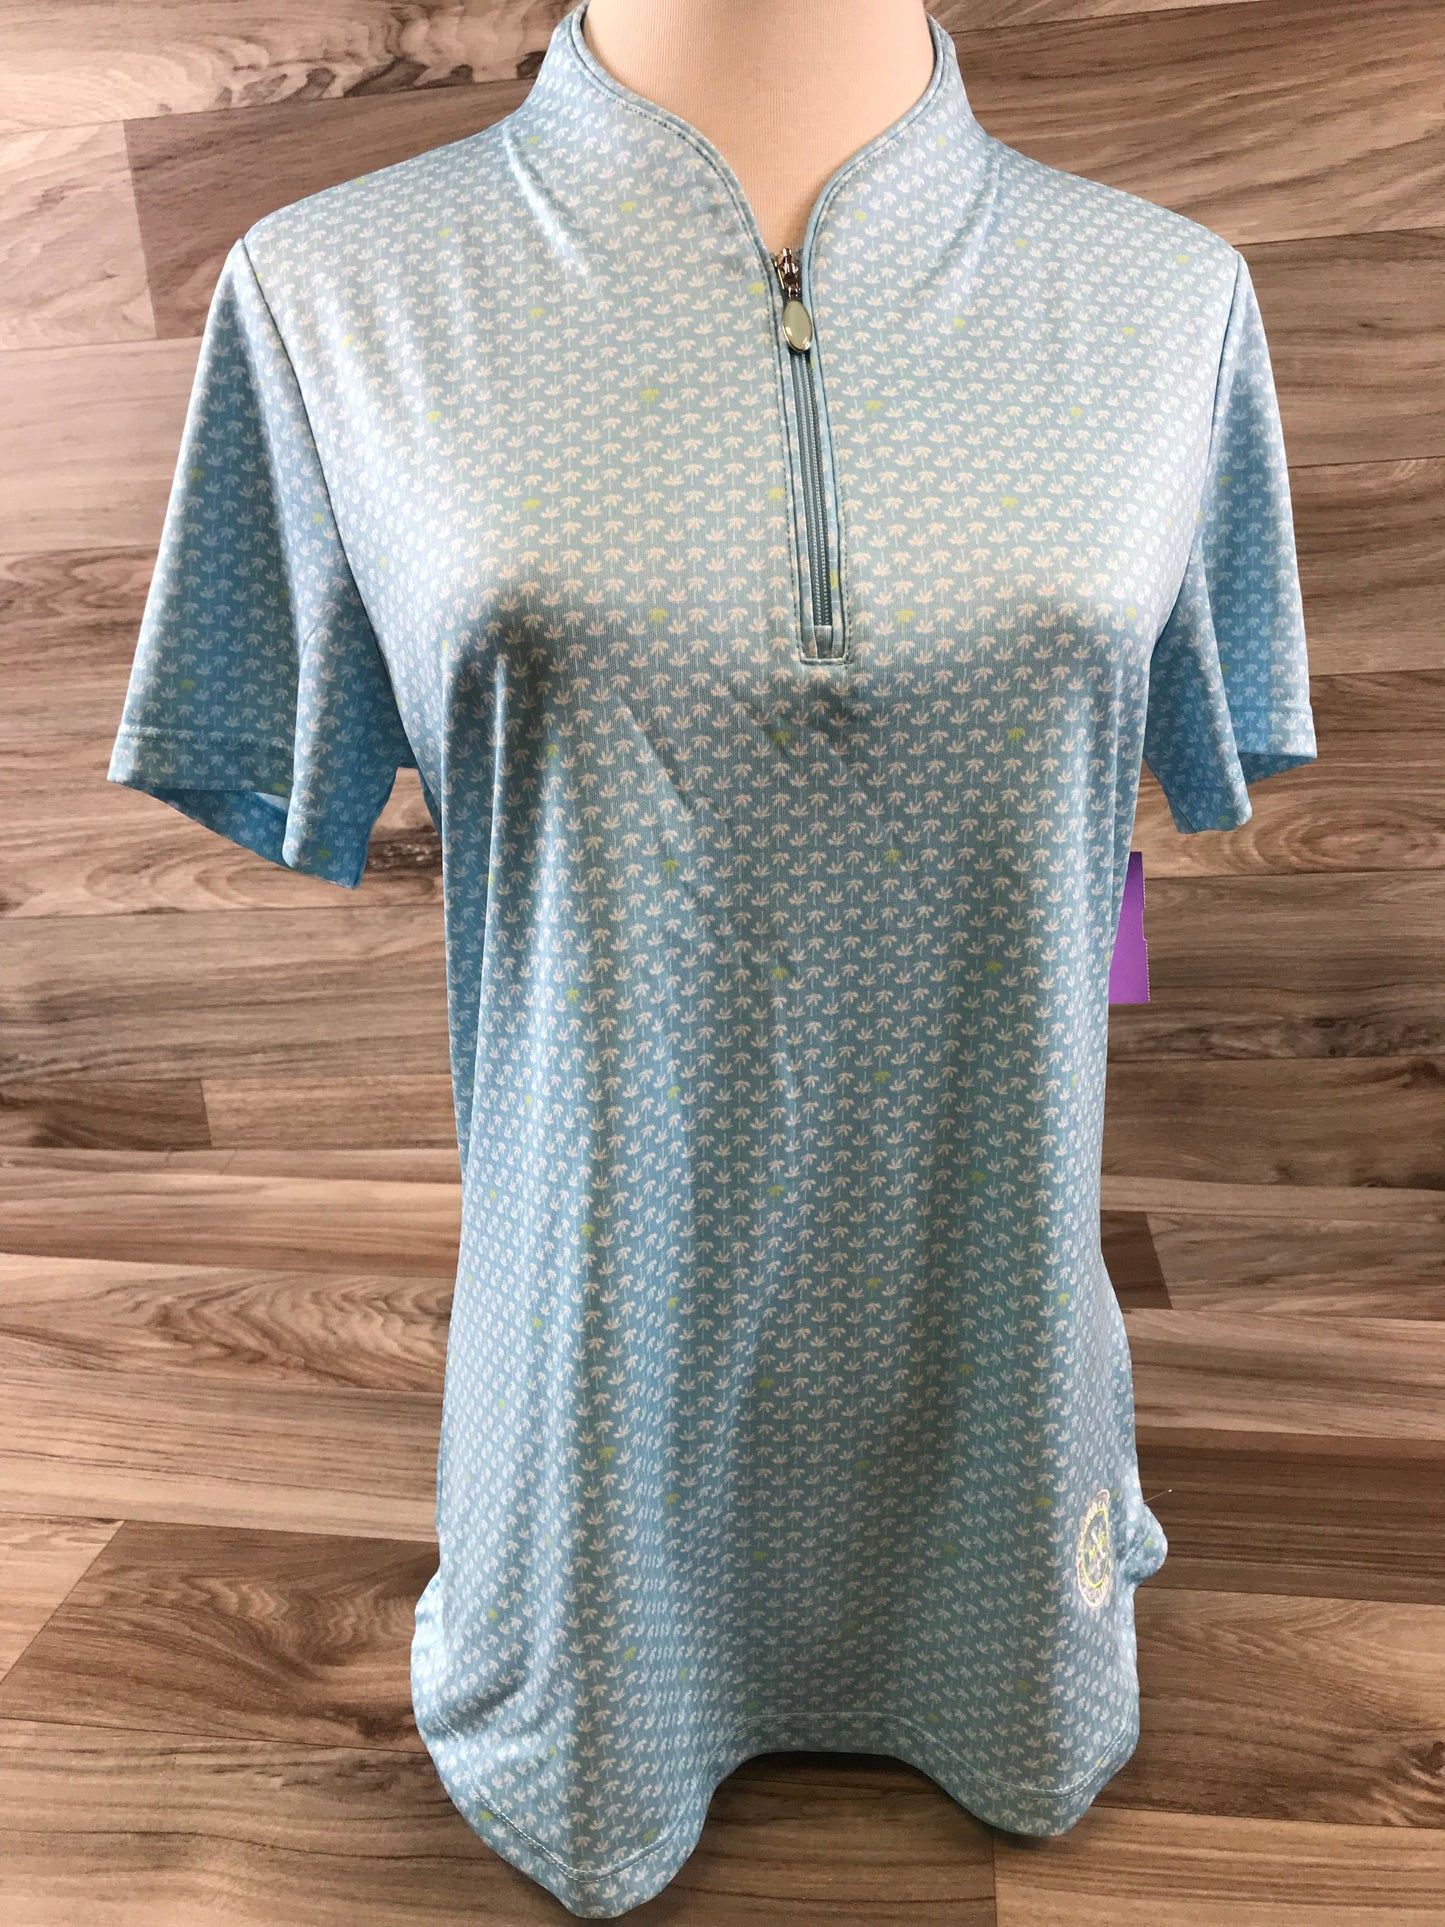 Blue & White Athletic Top Short Sleeve Clothes Mentor, Size M